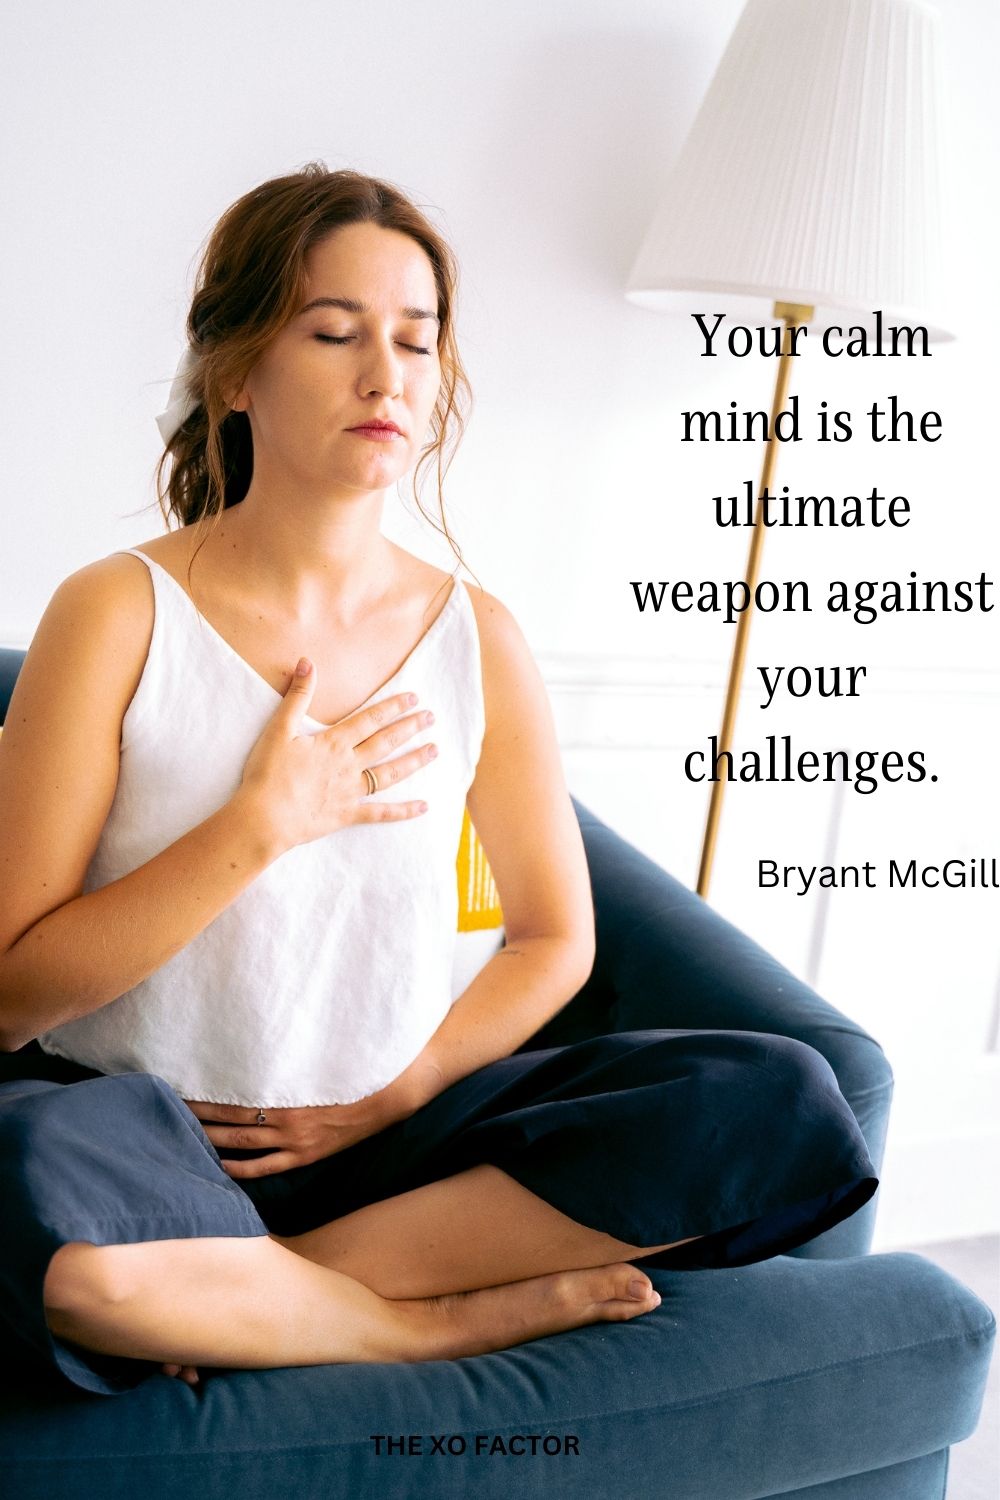 Your calm mind is the ultimate weapon against your challenges.
Bryant McGill